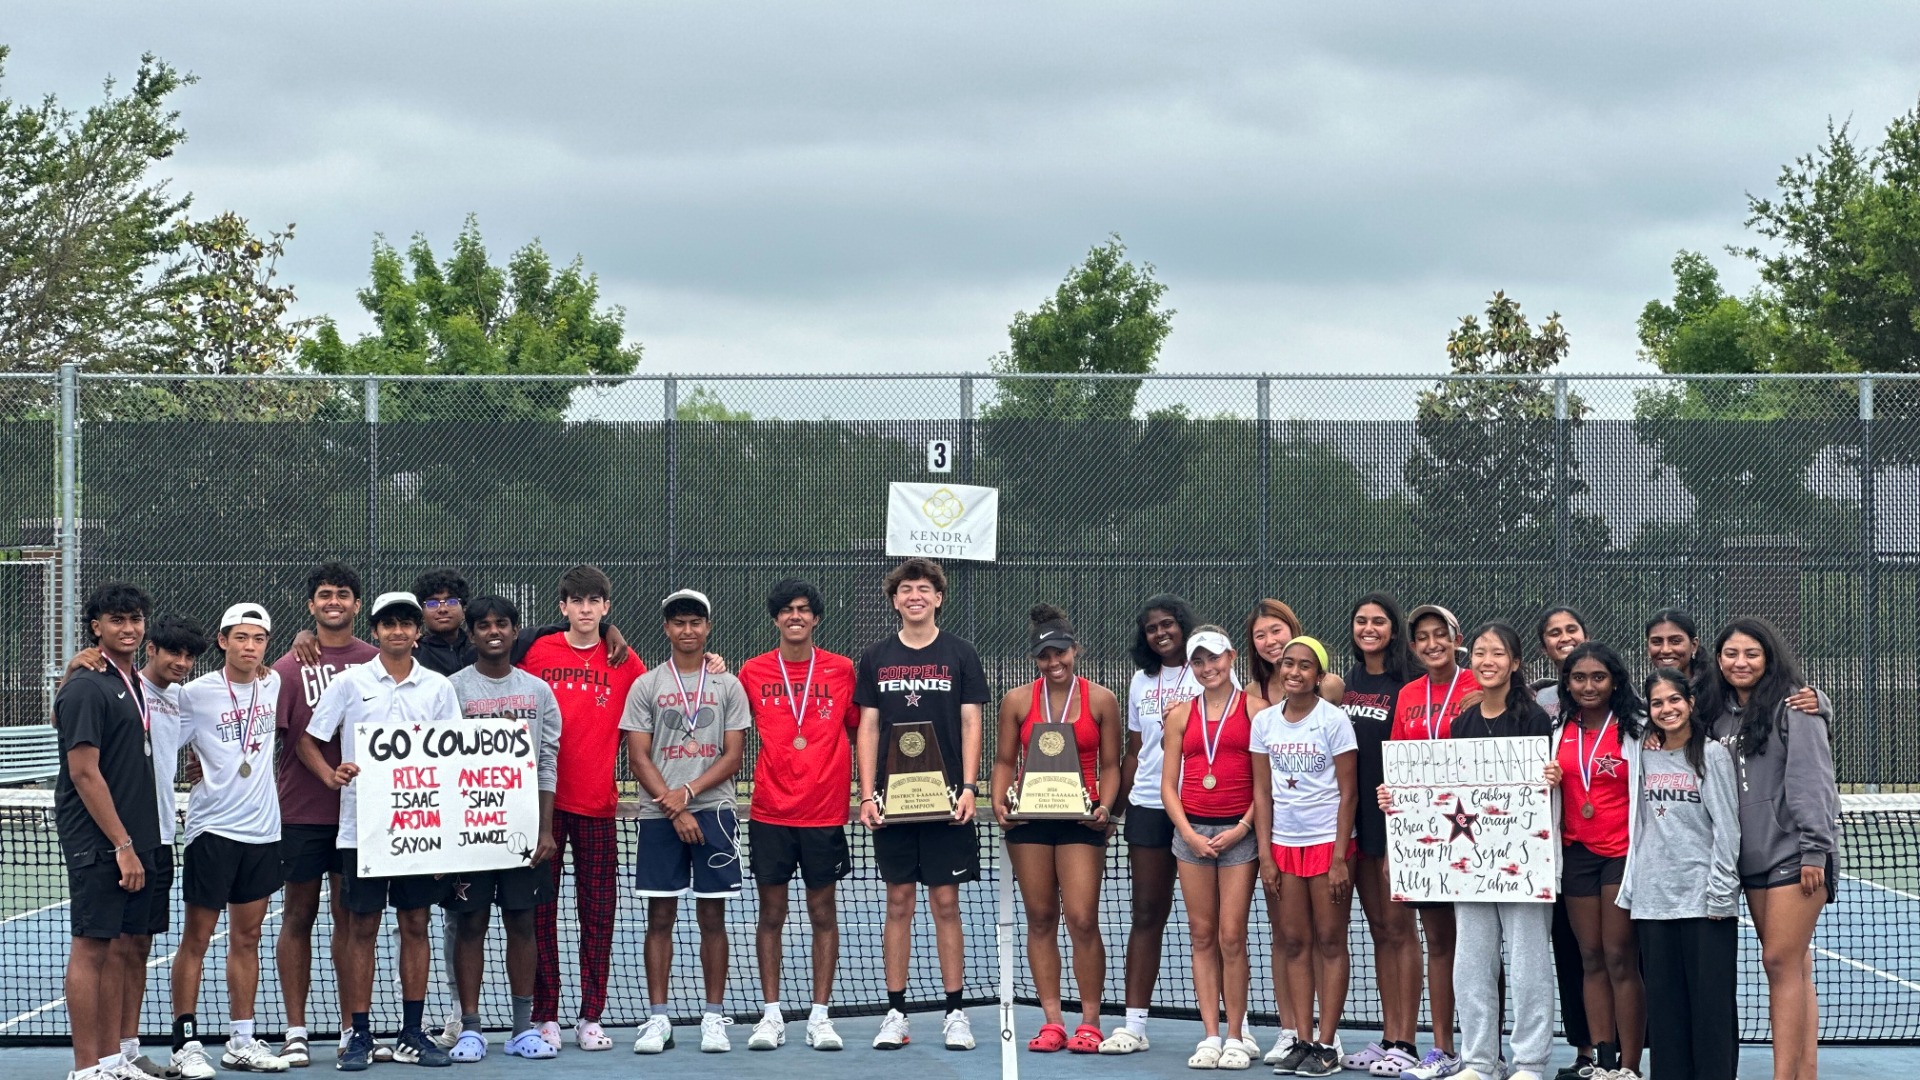 Coppell High SchoolSlide 3 - Tennis takes on DISTRICT